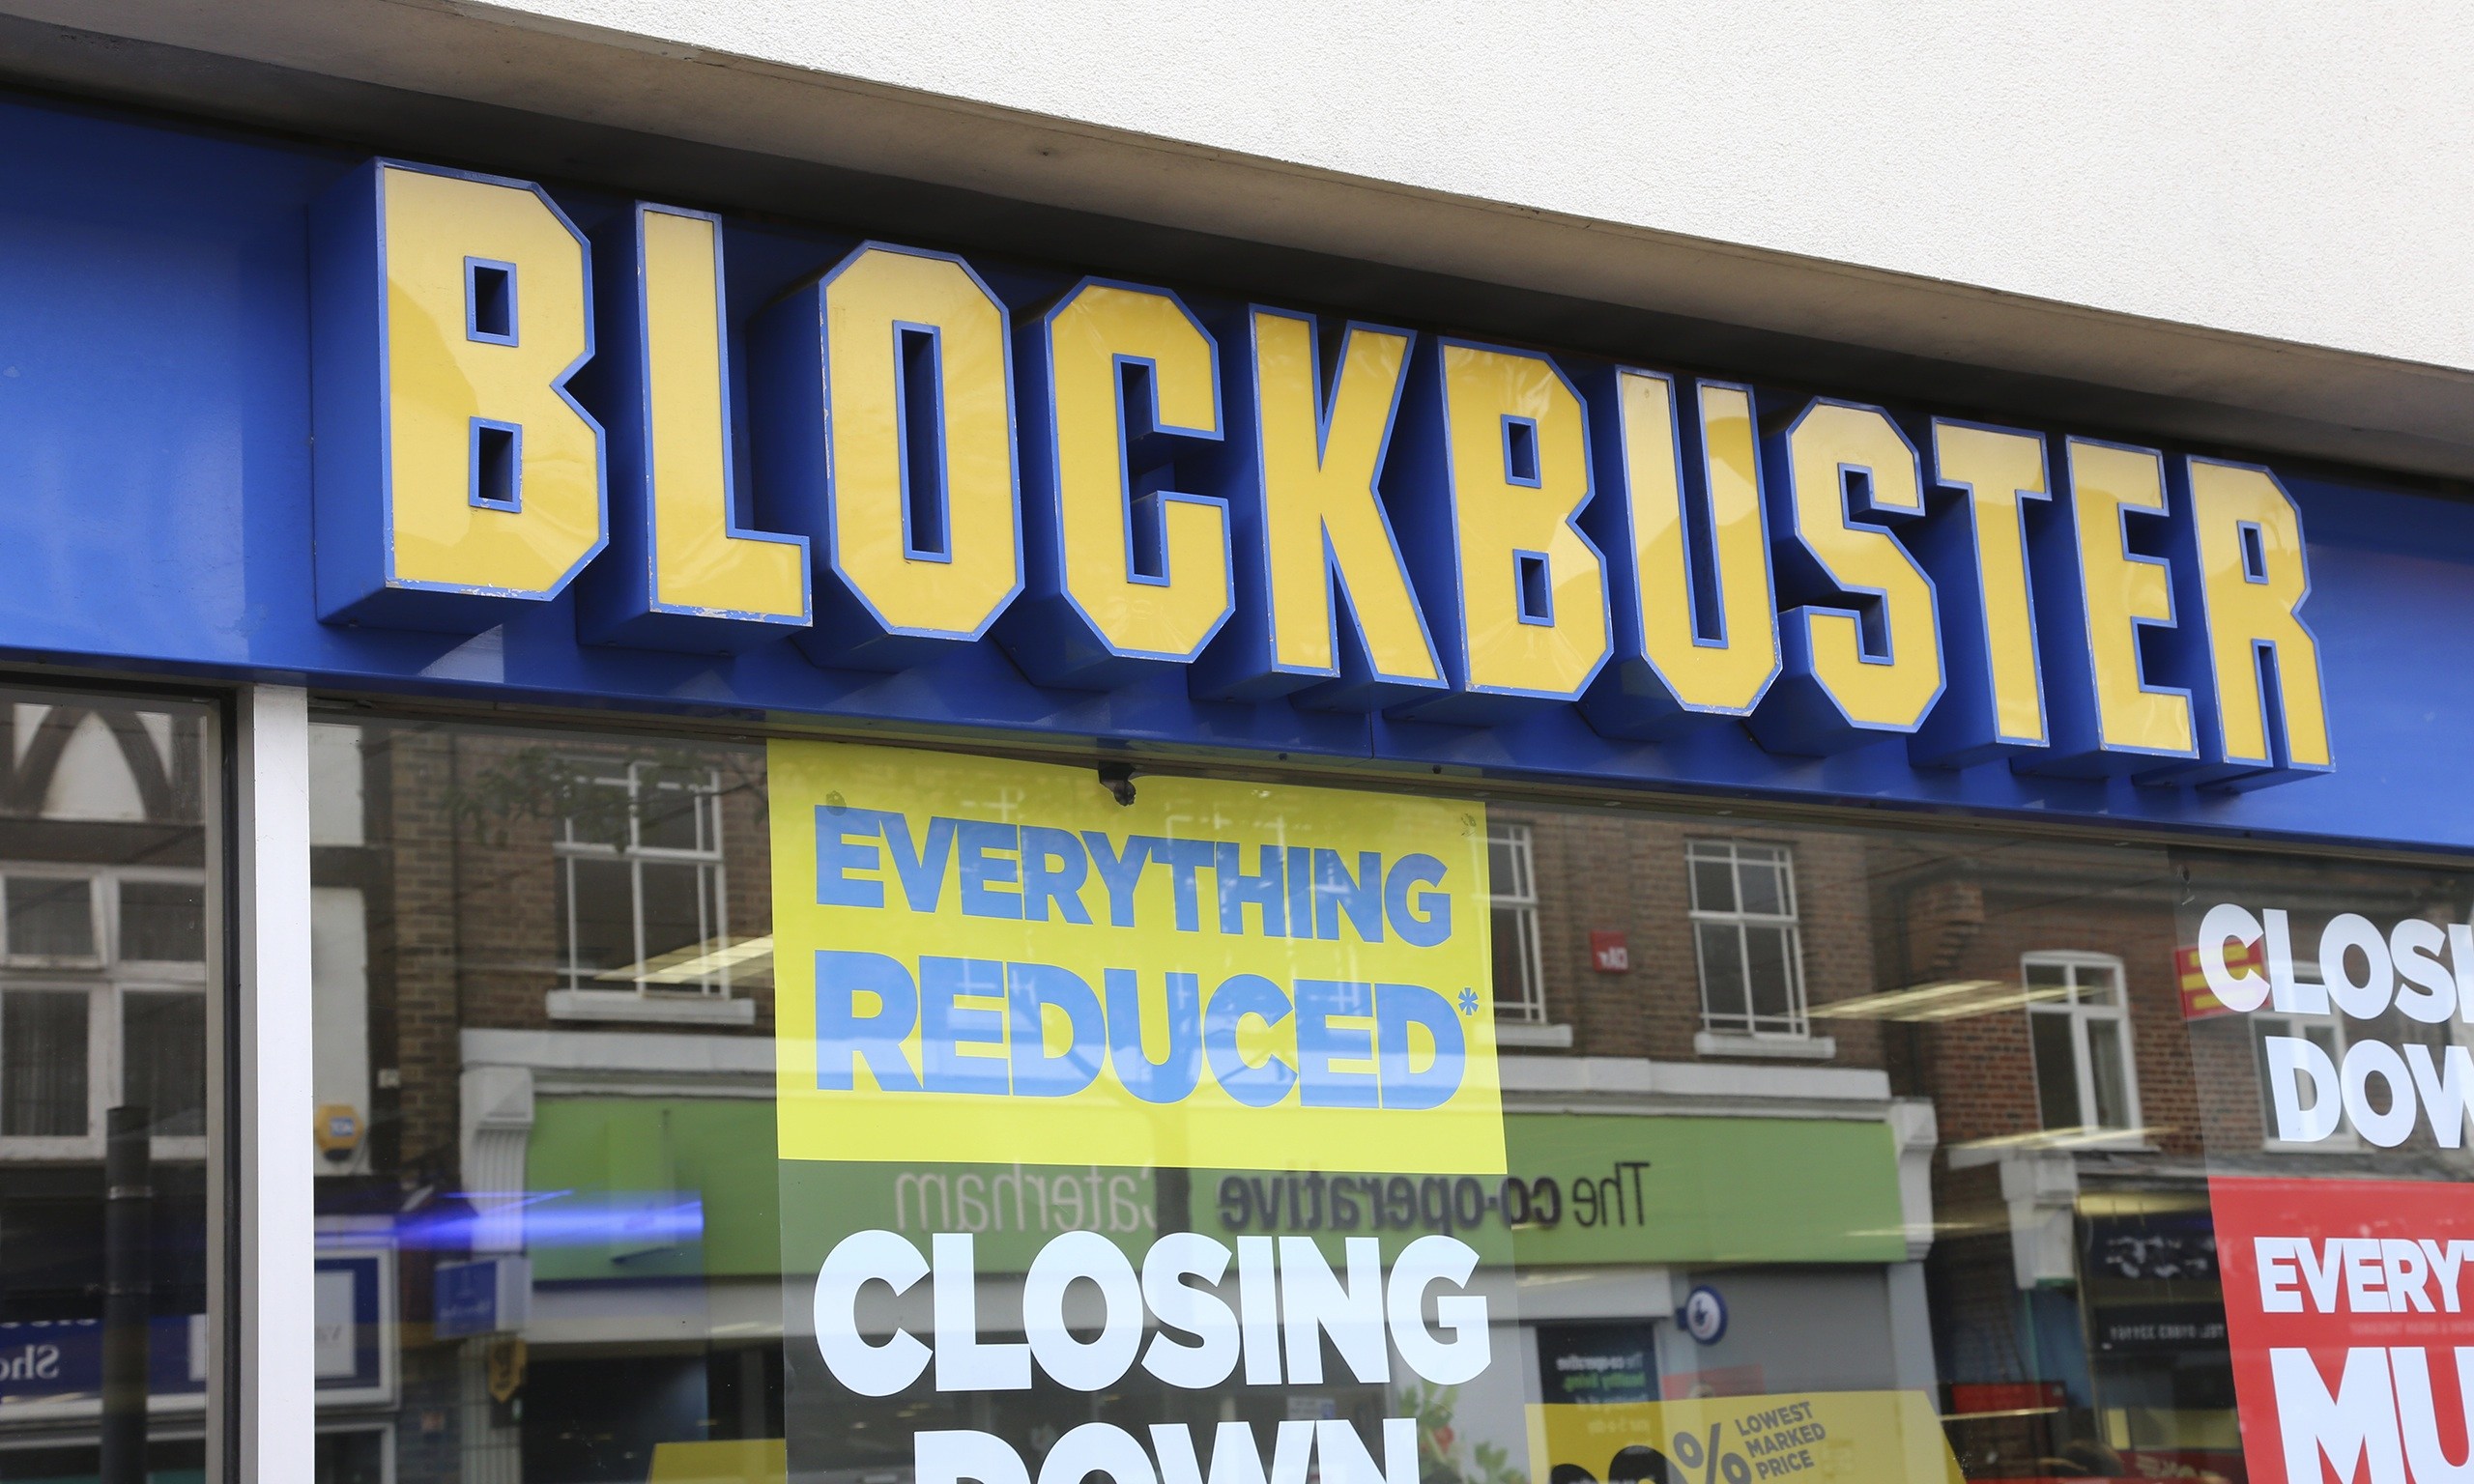 Blockbuster to close a quarter of its stores with loss of more than 450